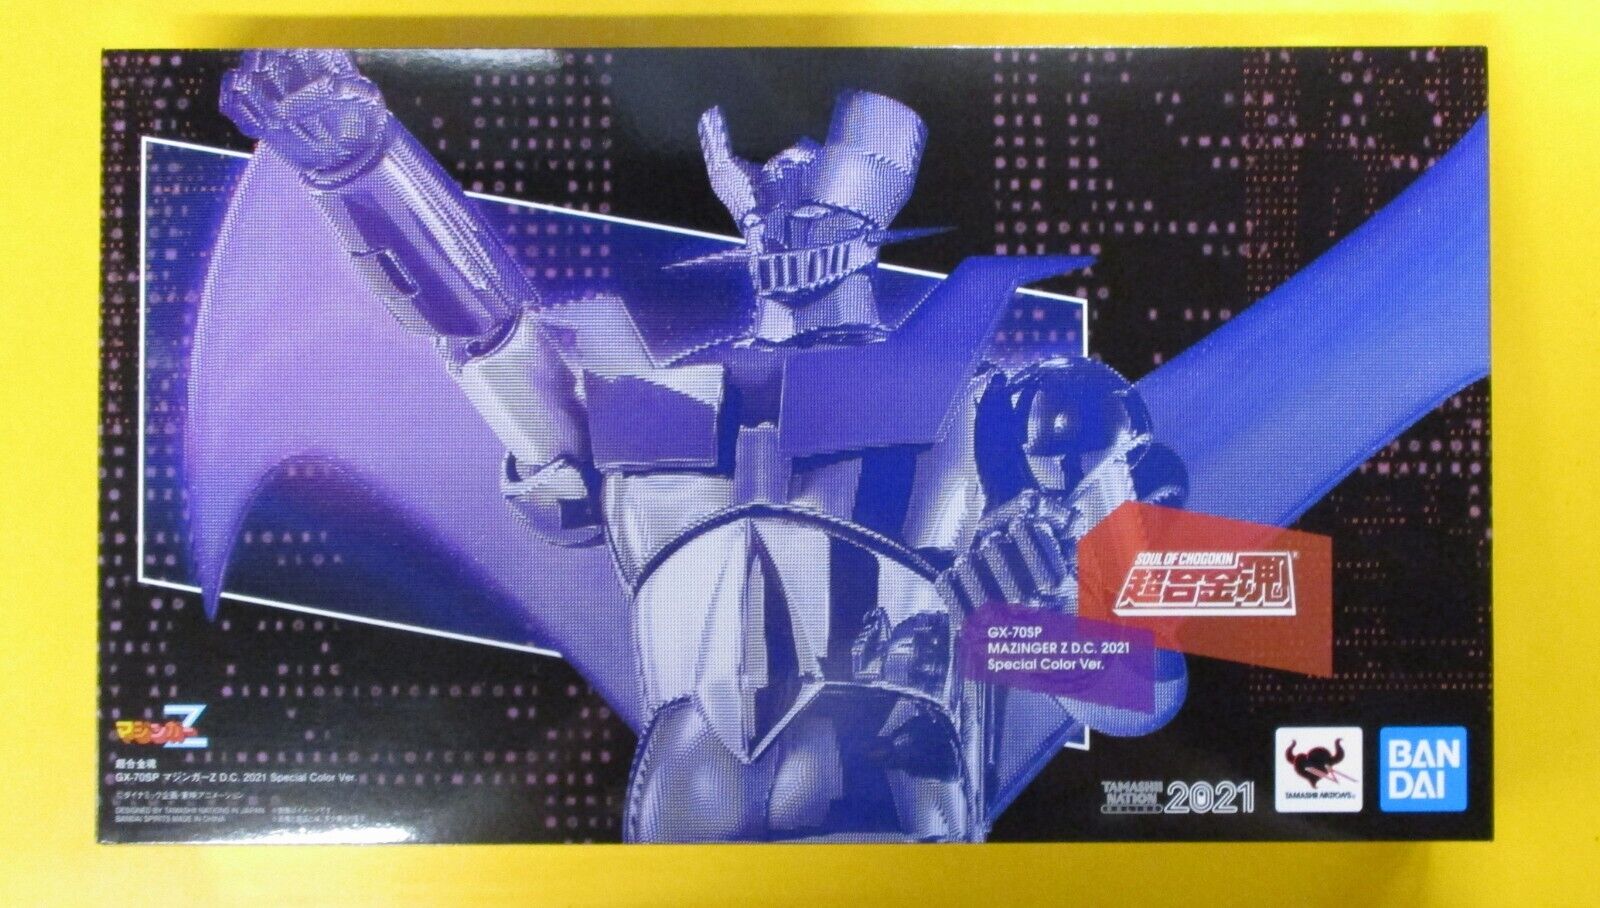 BANDAI 2021 Mazinger Z  Superalloy Soul of Chogokin GX-70SP Figure Special Color